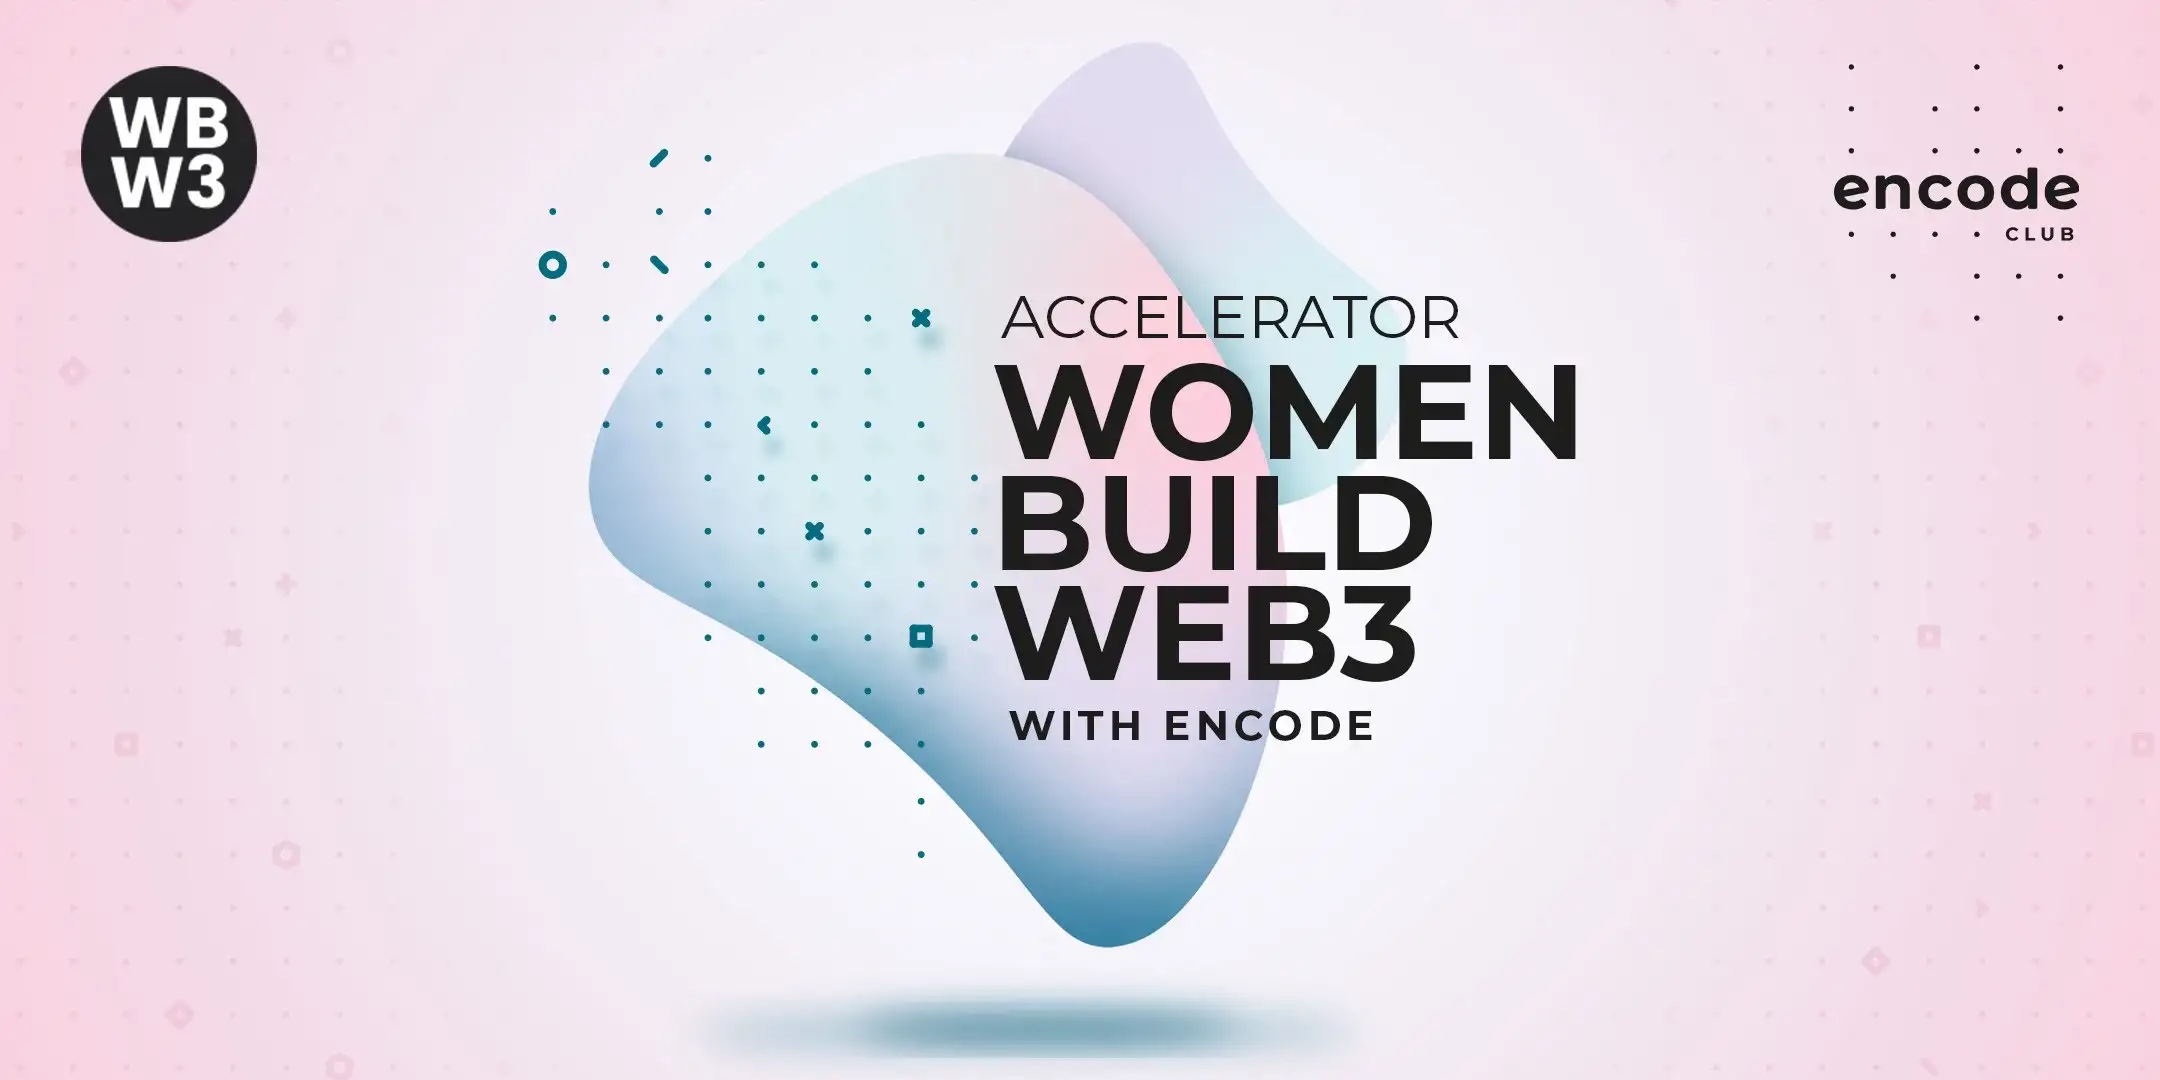 Women Build Web3 (with Encode) Accelerator Graphic